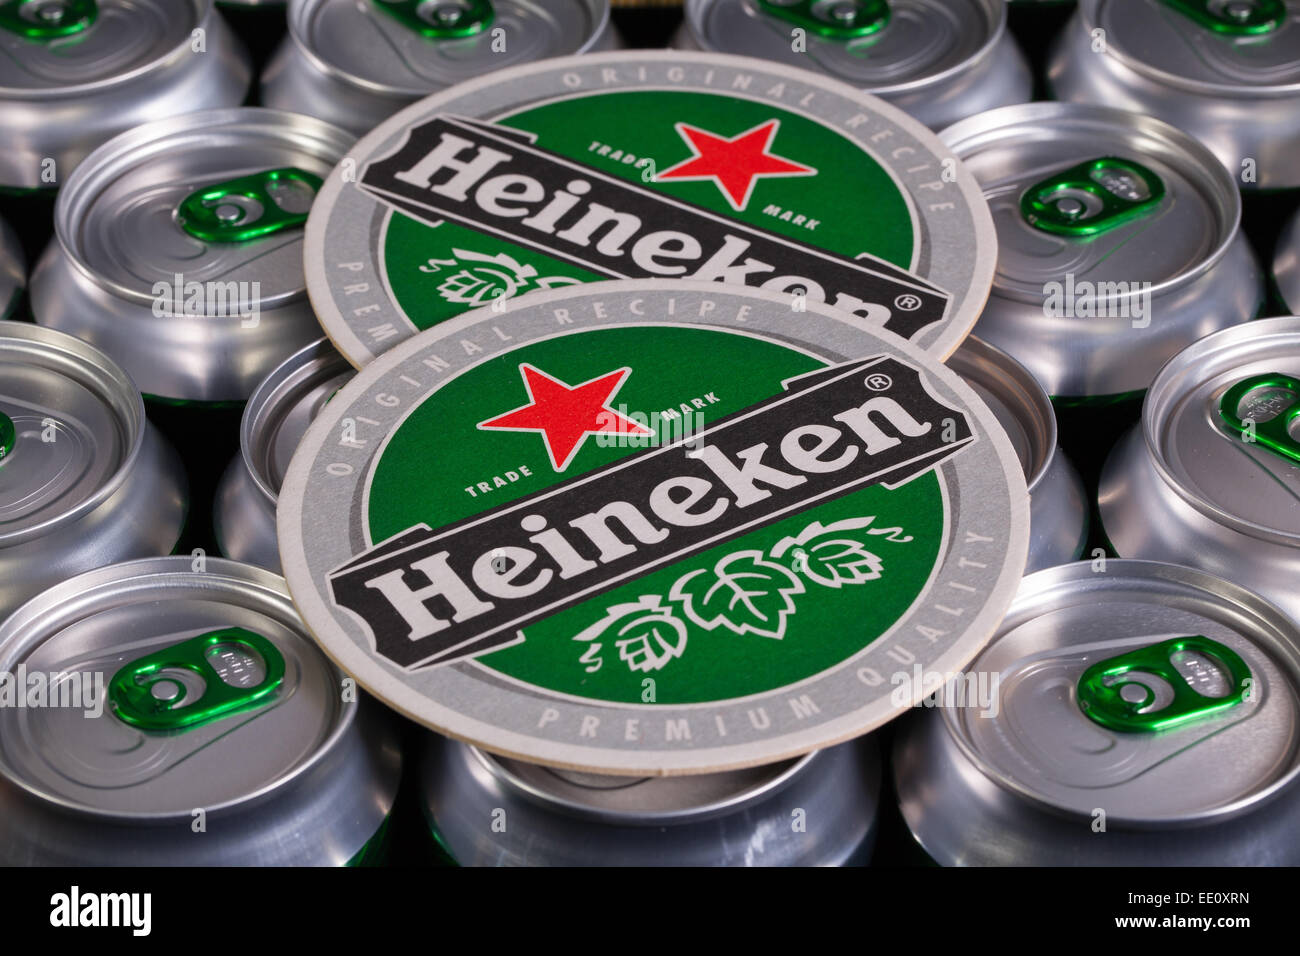 Czech Republic, Brno - January 5,2015: Pattern from much of drinking cans of beer and Heinekem beermats.Heineken Lager Beer,it w Stock Photo